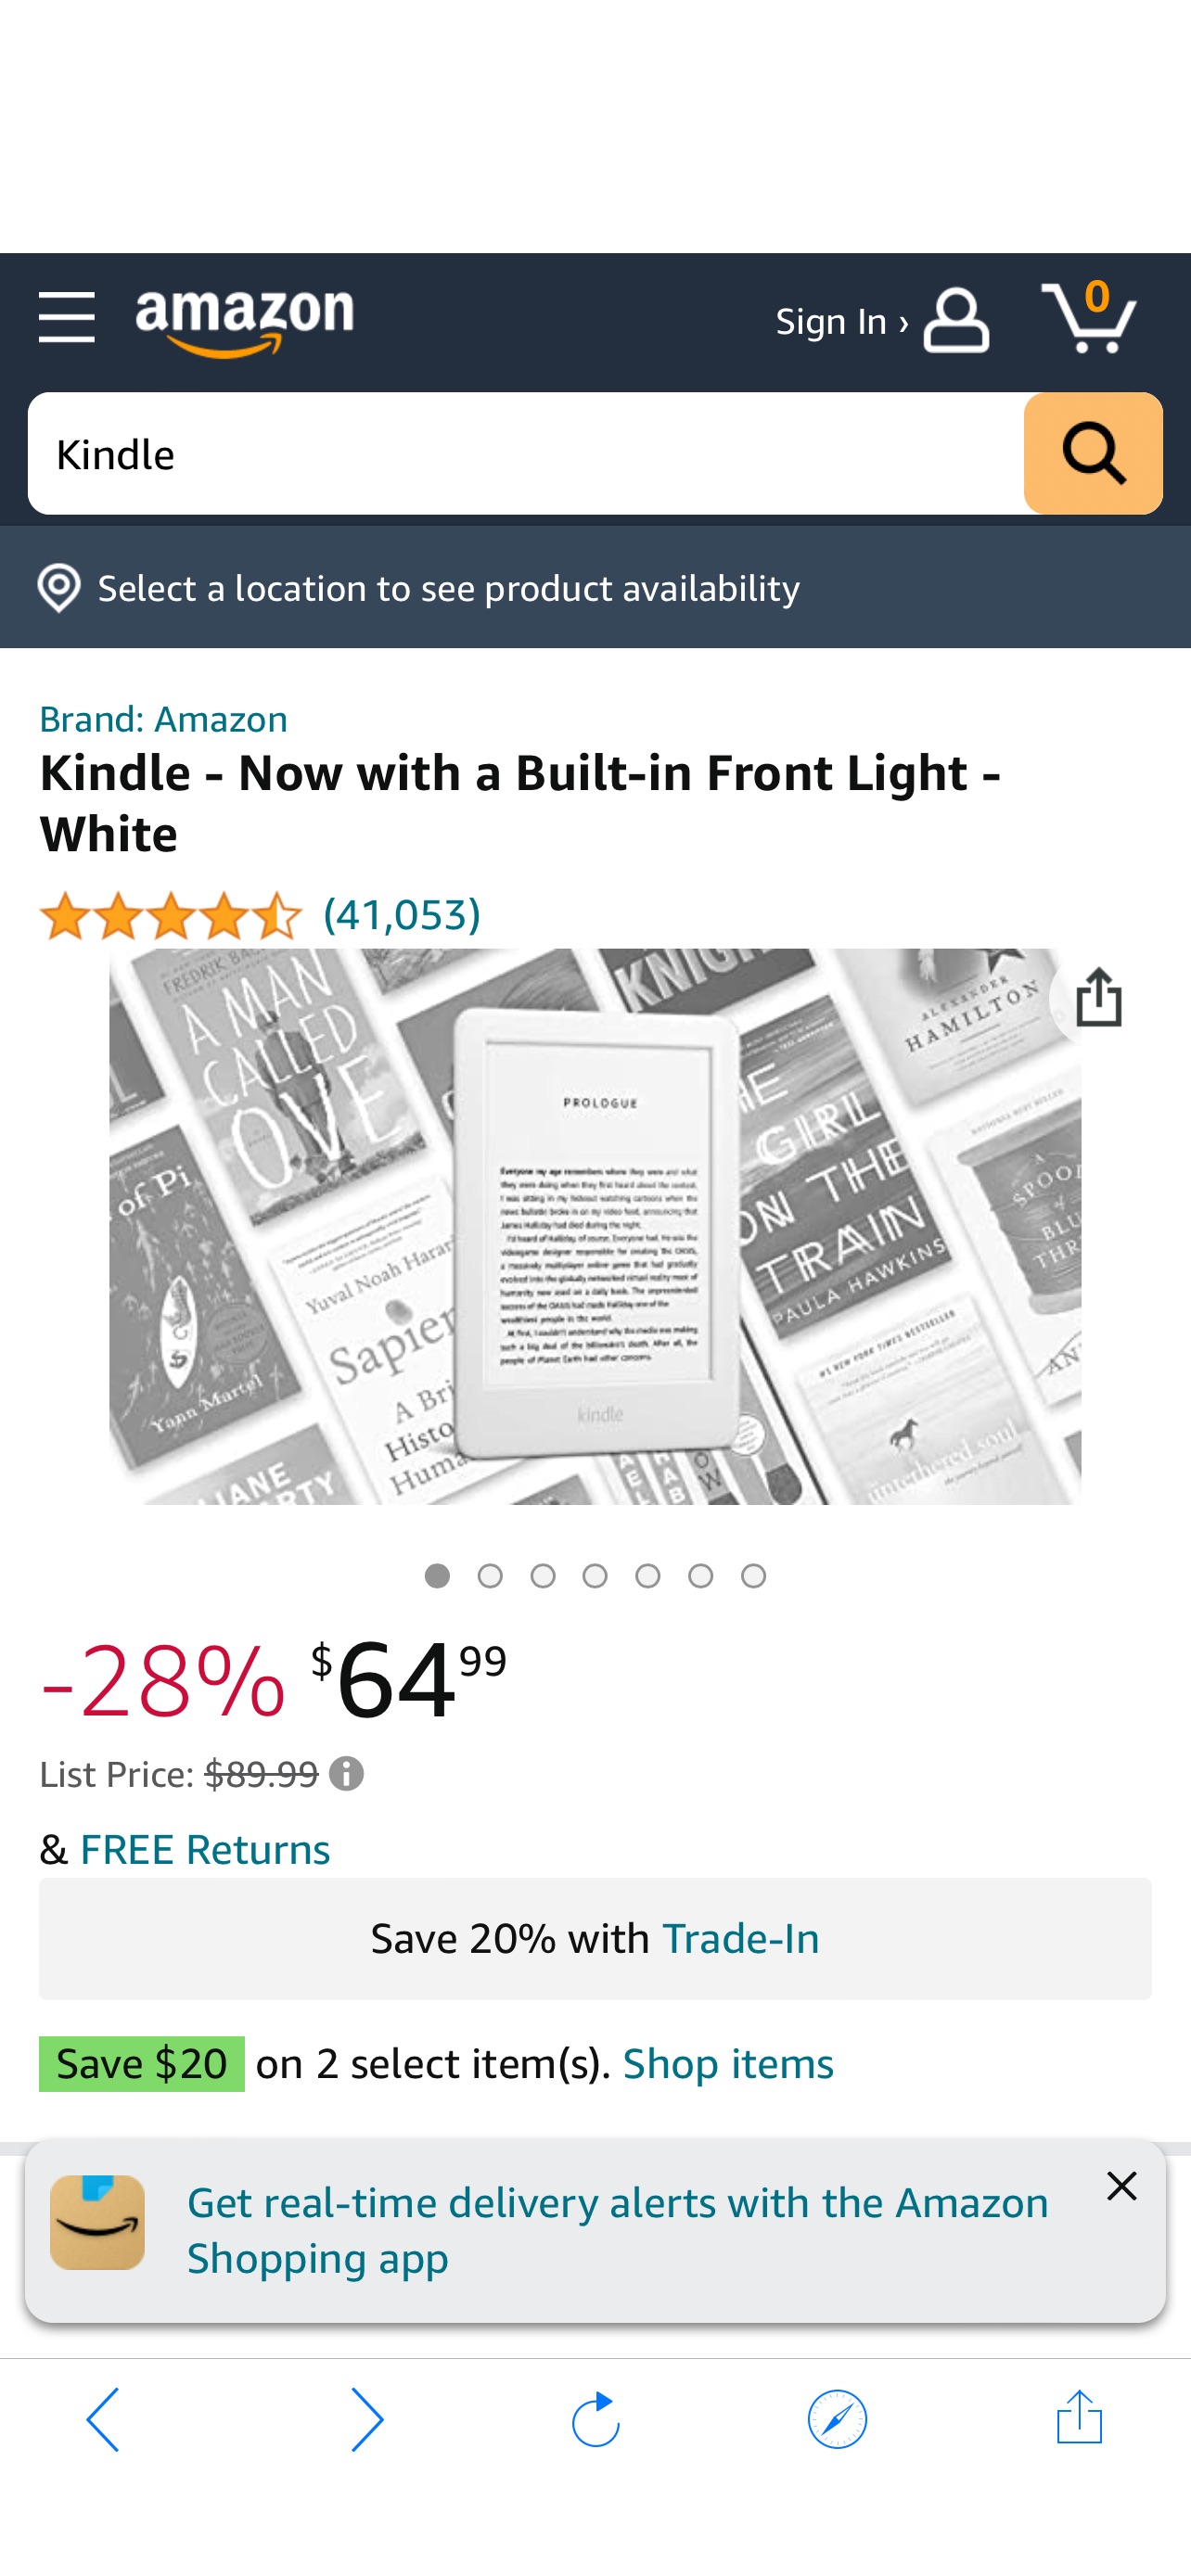 Amazon.com: Kindle - Now with a Built-in Front Light - White : Electronics